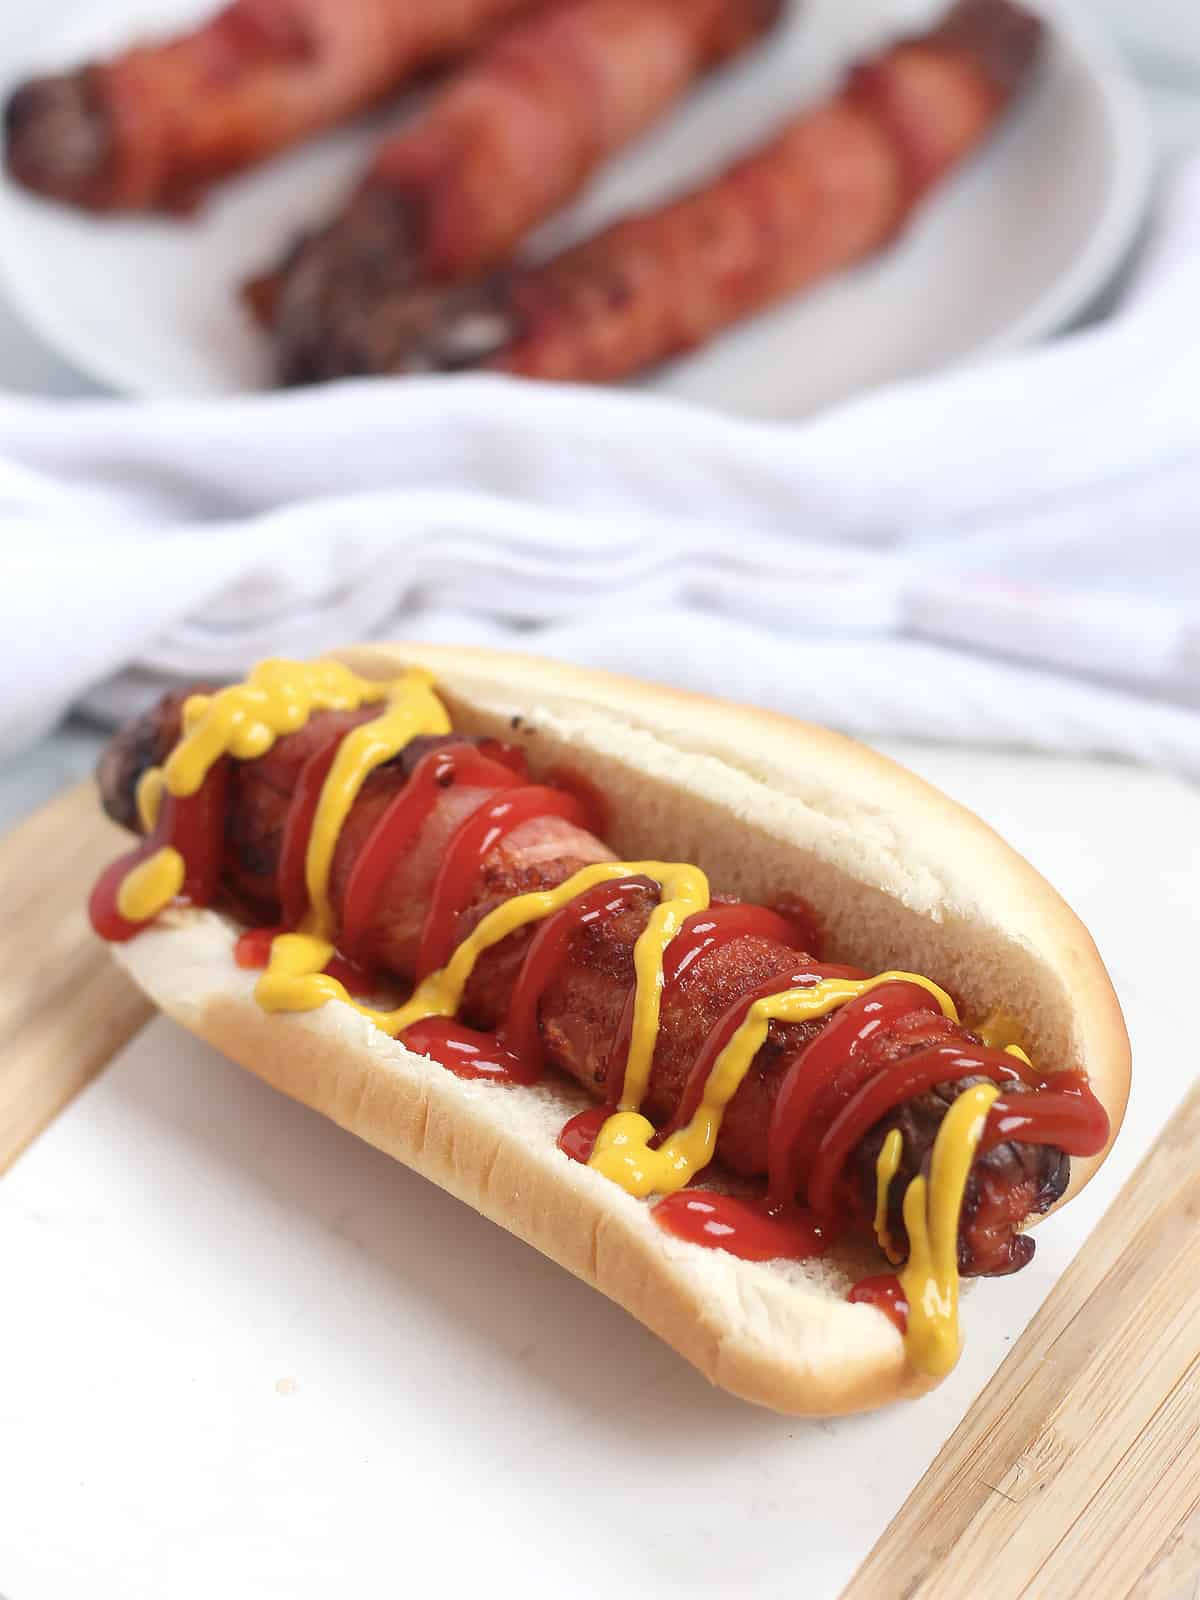 A hot dog in a bun, topped with condiments.